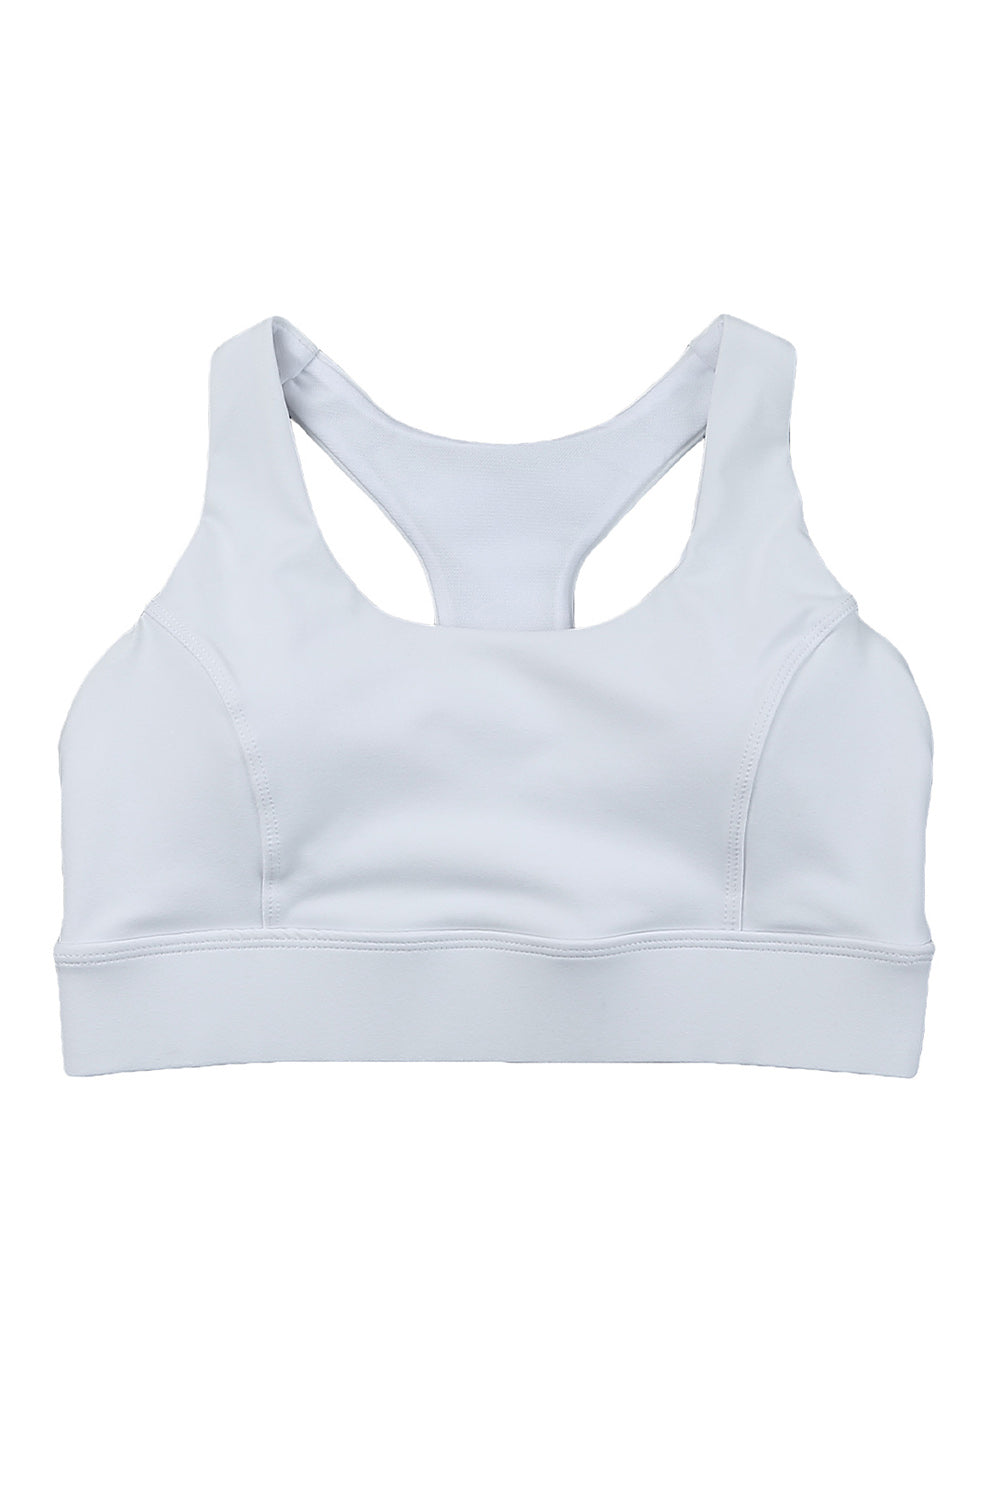 White Athletic Push Up Cut Out Wireless Sports Bra